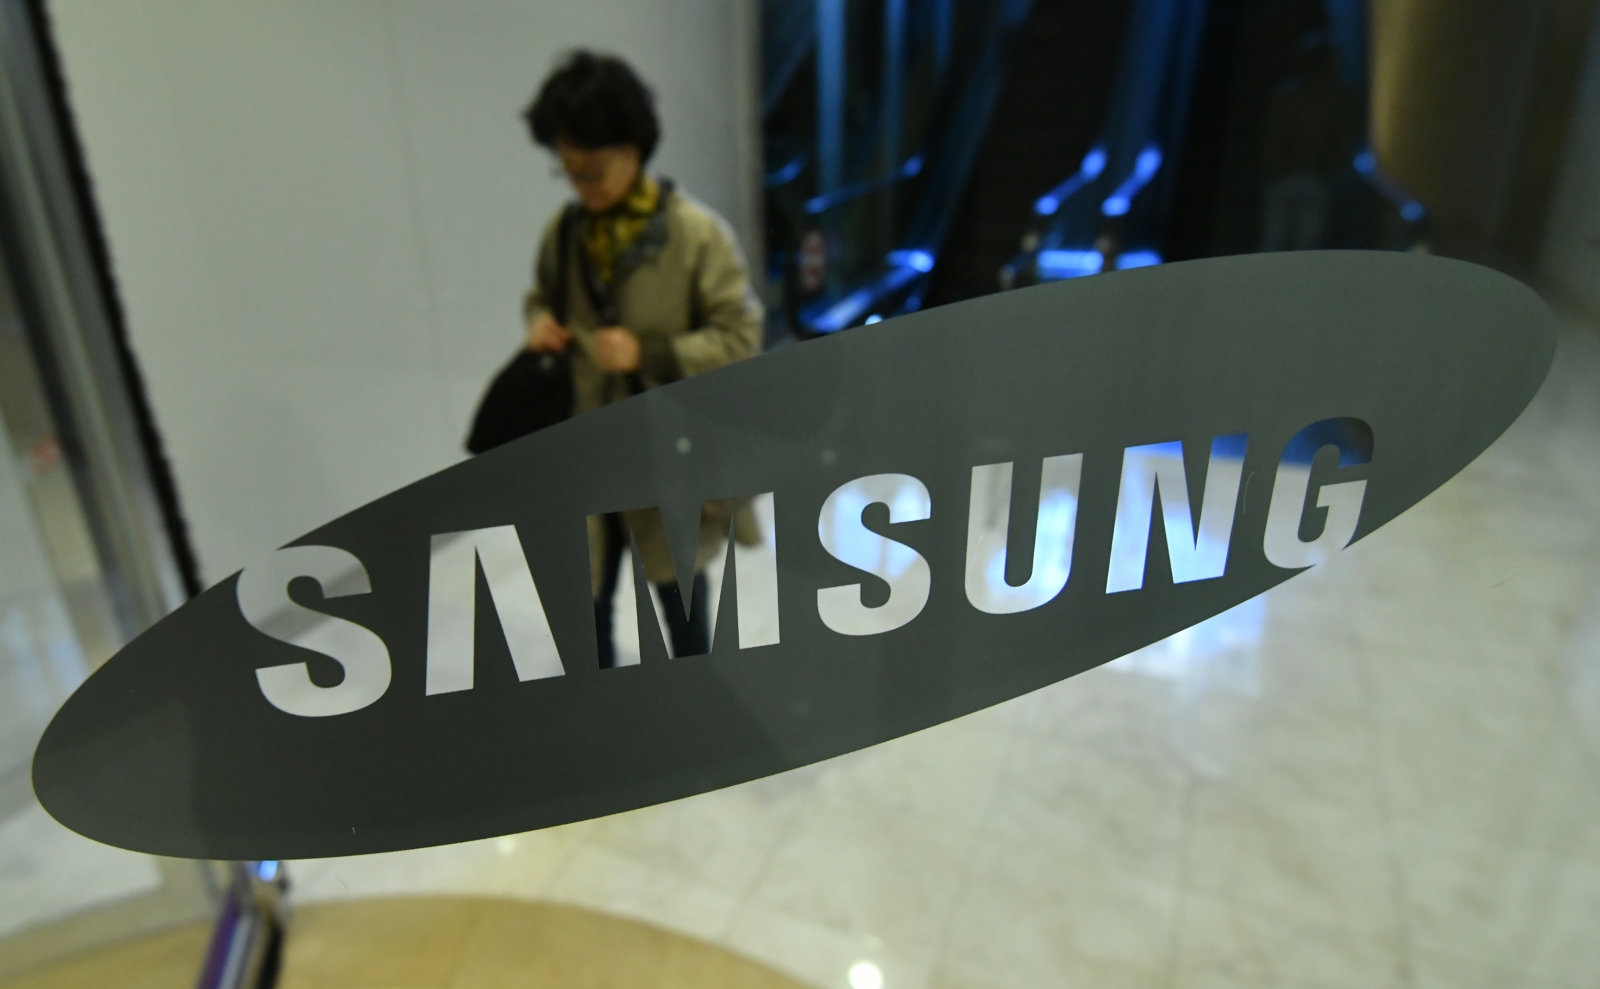 Samsung will bolster its mobile business with foldable and 5G phones | DeviceDaily.com